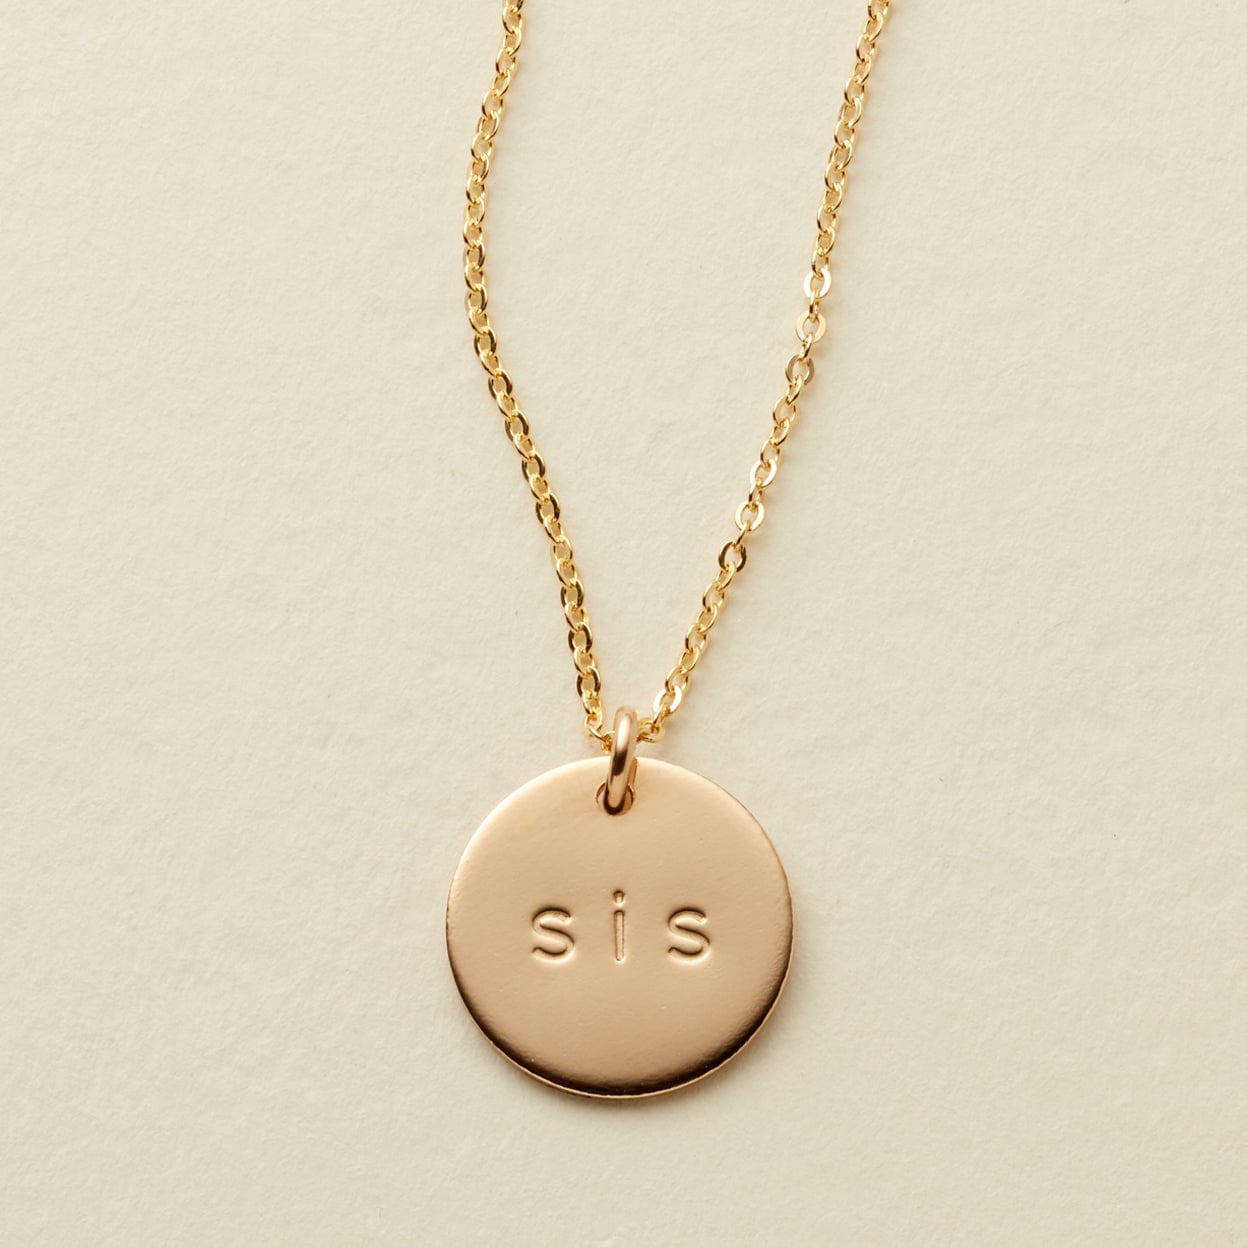 The Sis' Disc Necklace Necklace